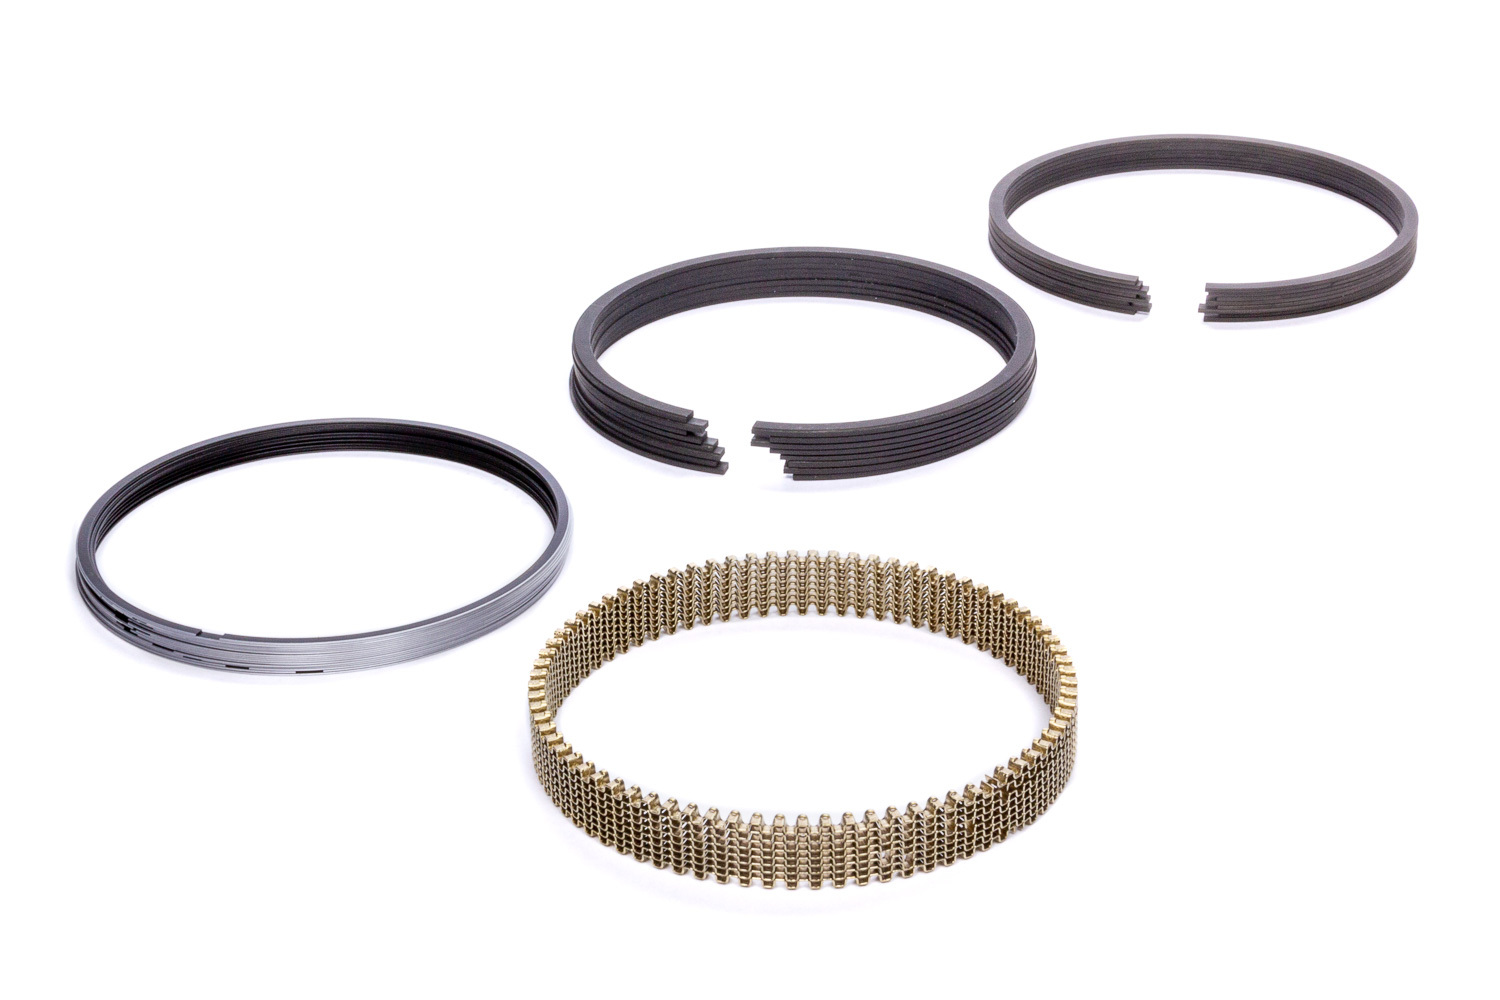 Hastings Piston Rings SN9065045 Piston Rings, Premium Ductile and Steel Series, 4.040 in Bore, File Fit, 1.2 x 1.5 x 3.0 mm Thick, Standard Tension, Stainless Steel, Gas Nitride, 8-Cylinder, Kit